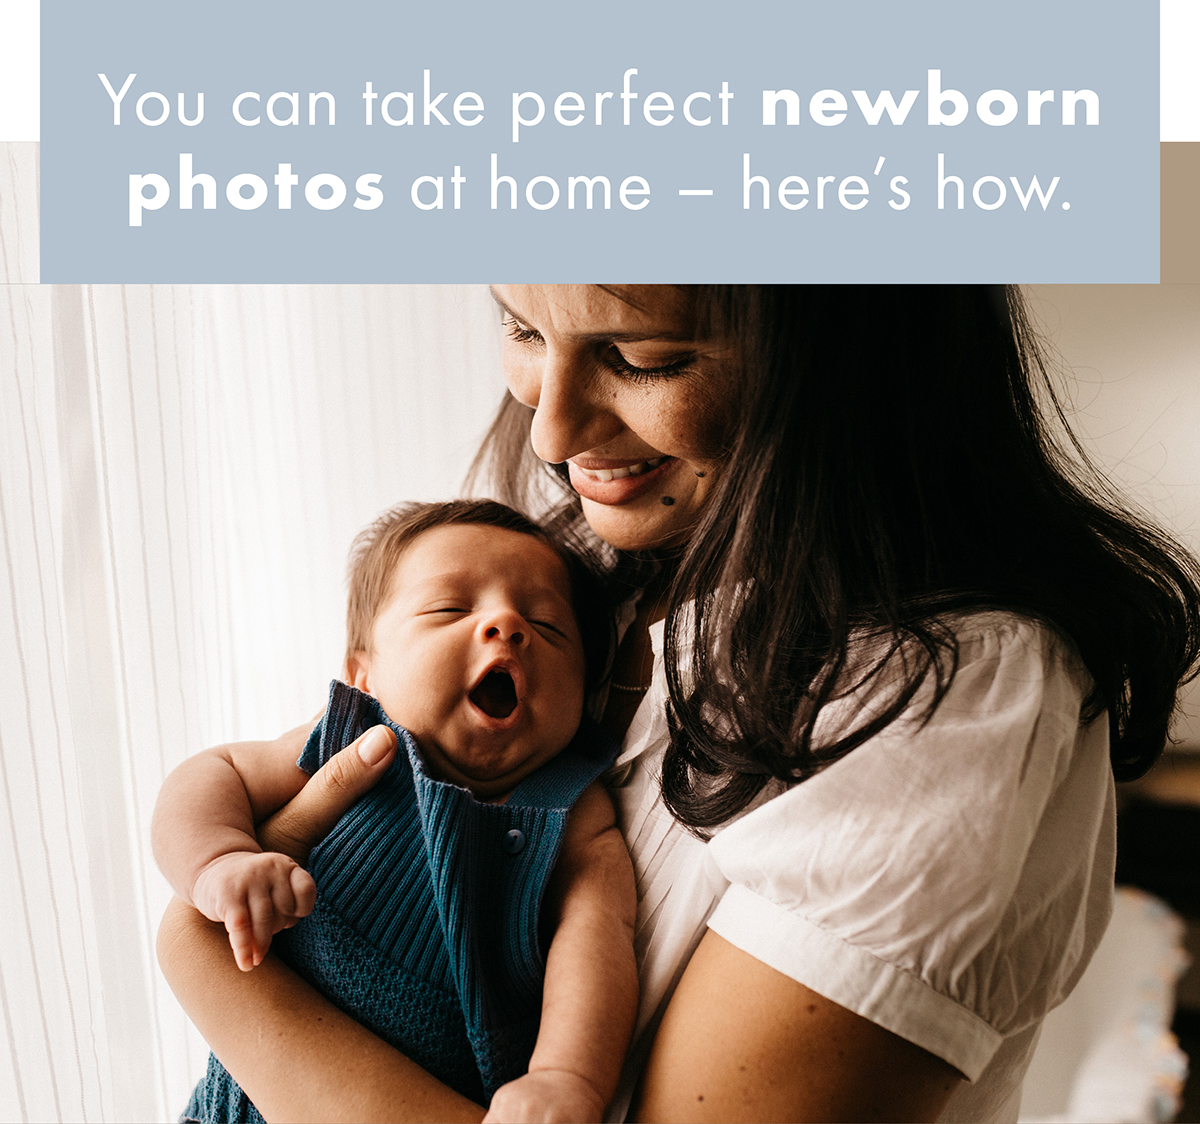 You can take perfect newborn photos at home - here's how. 